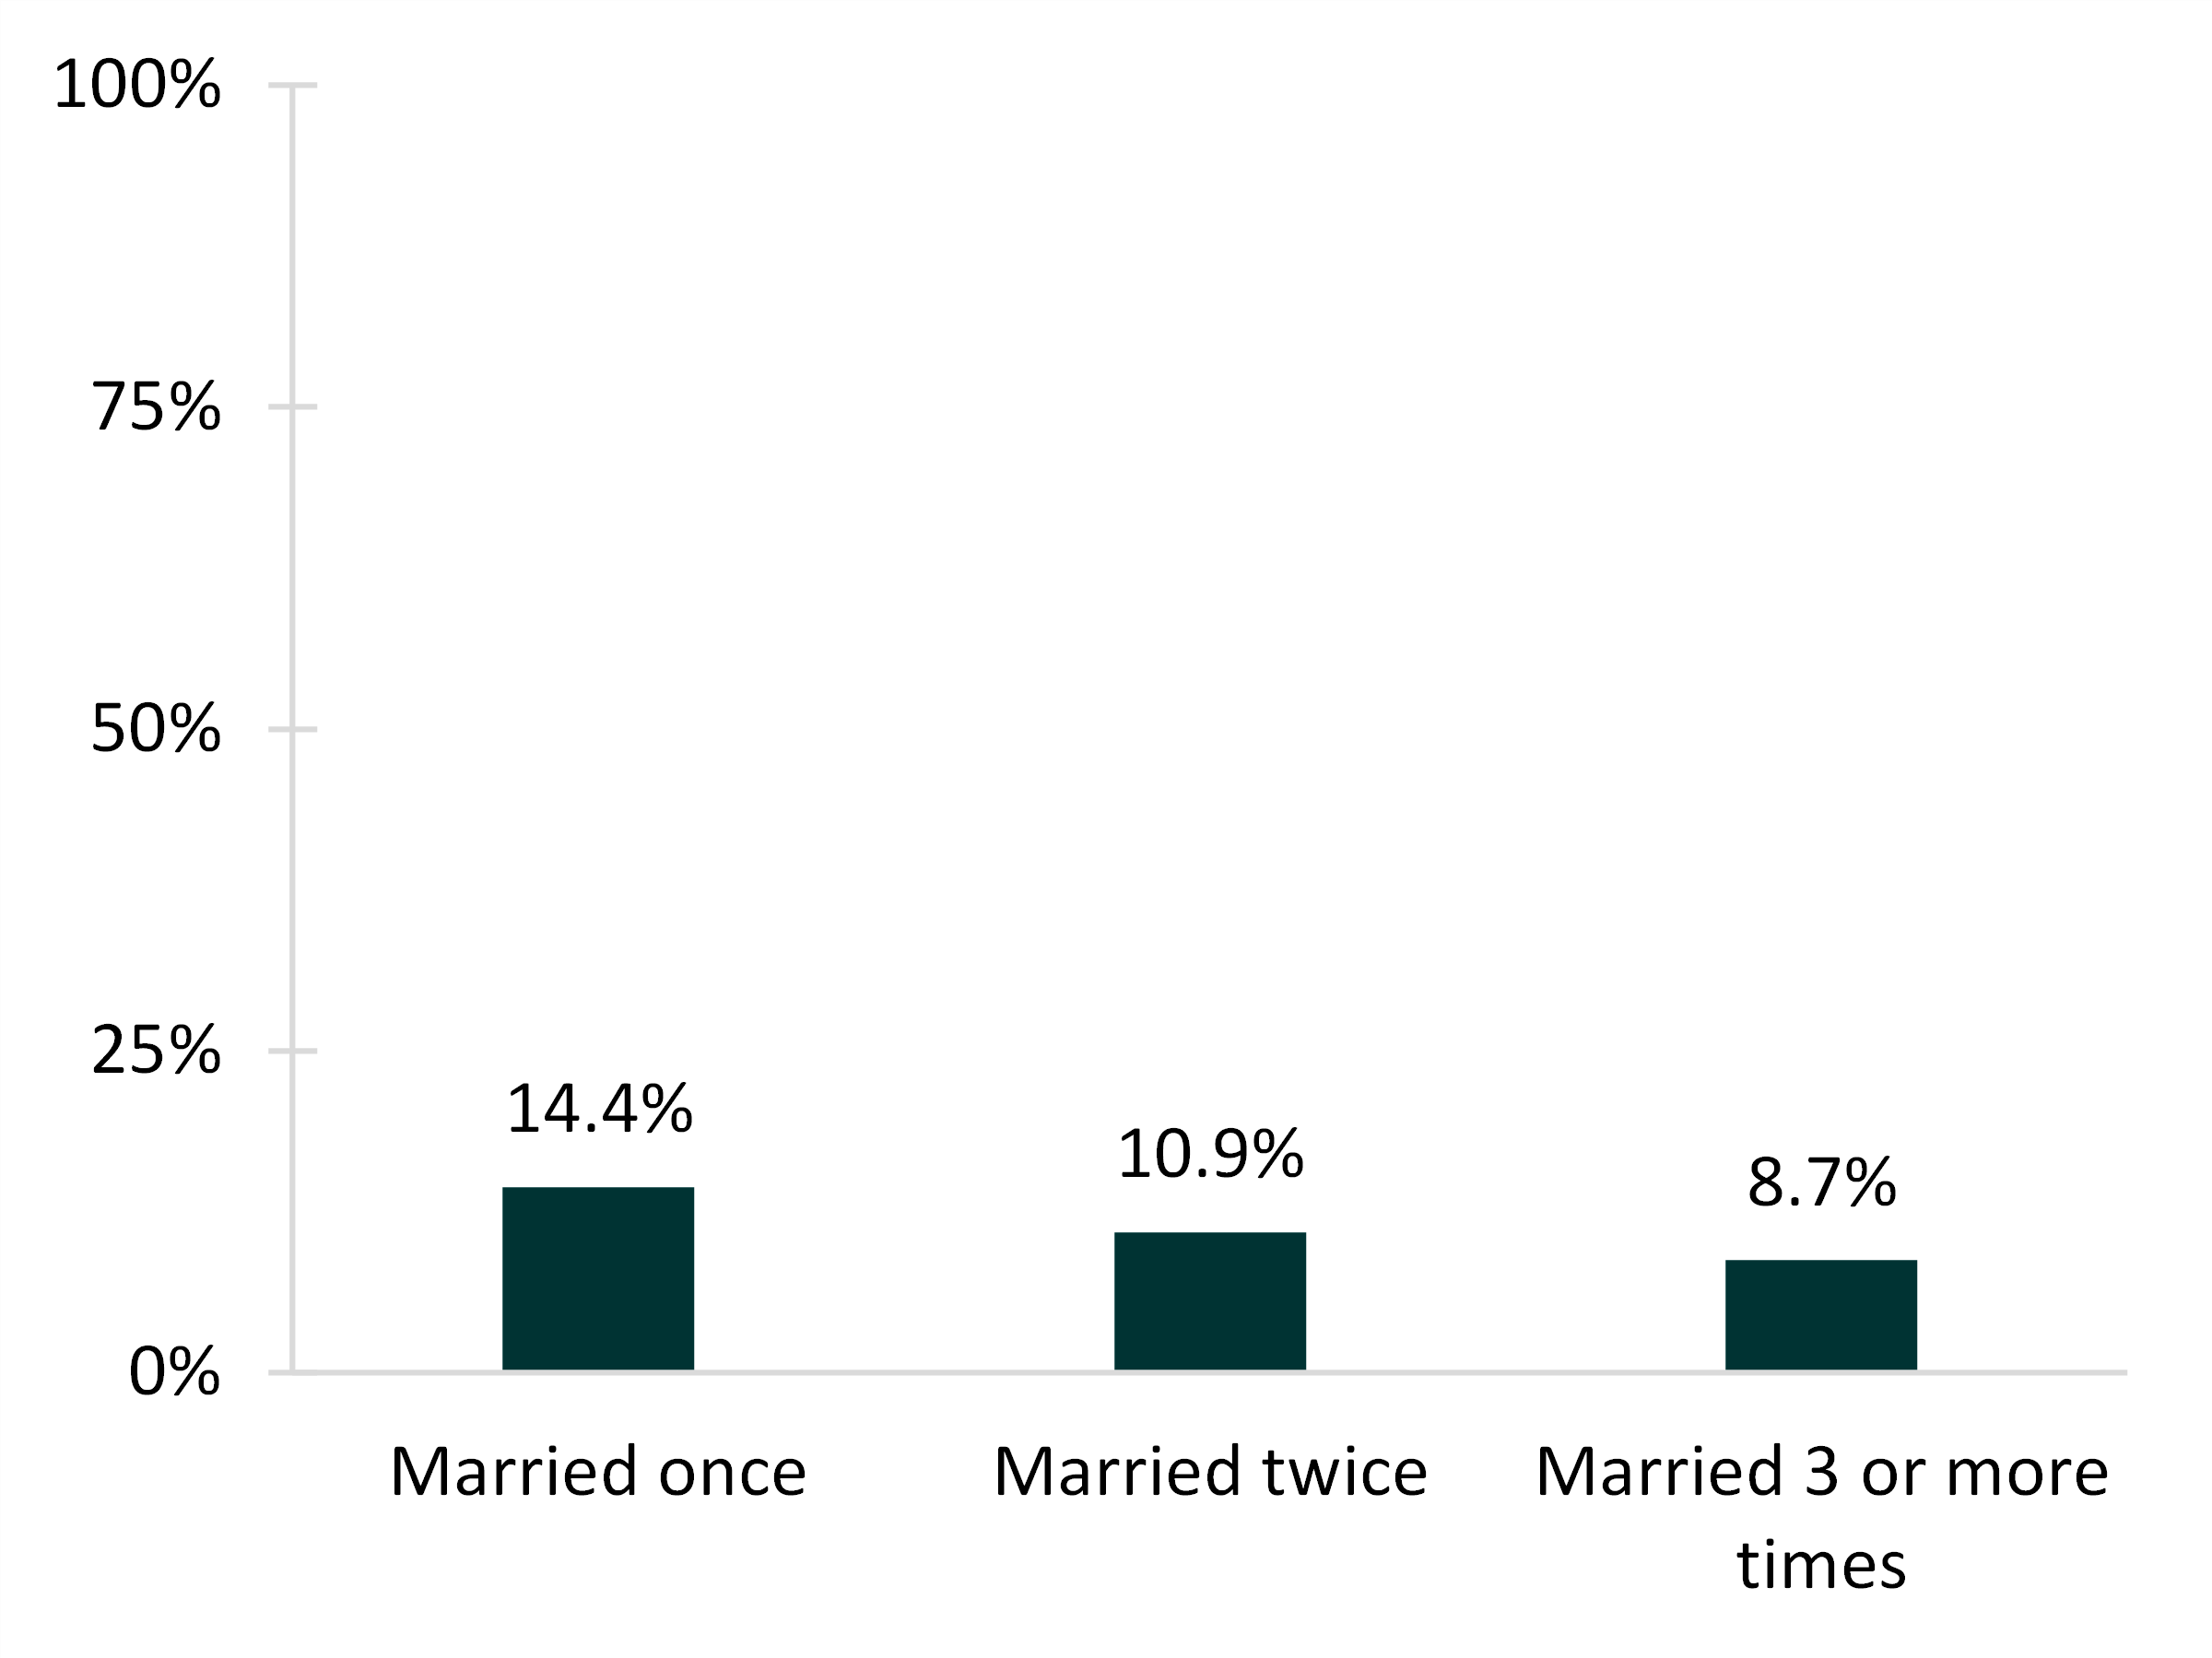 Figure 2. Share of Newlyweds in a LAT Relationship by Times Married, 2018